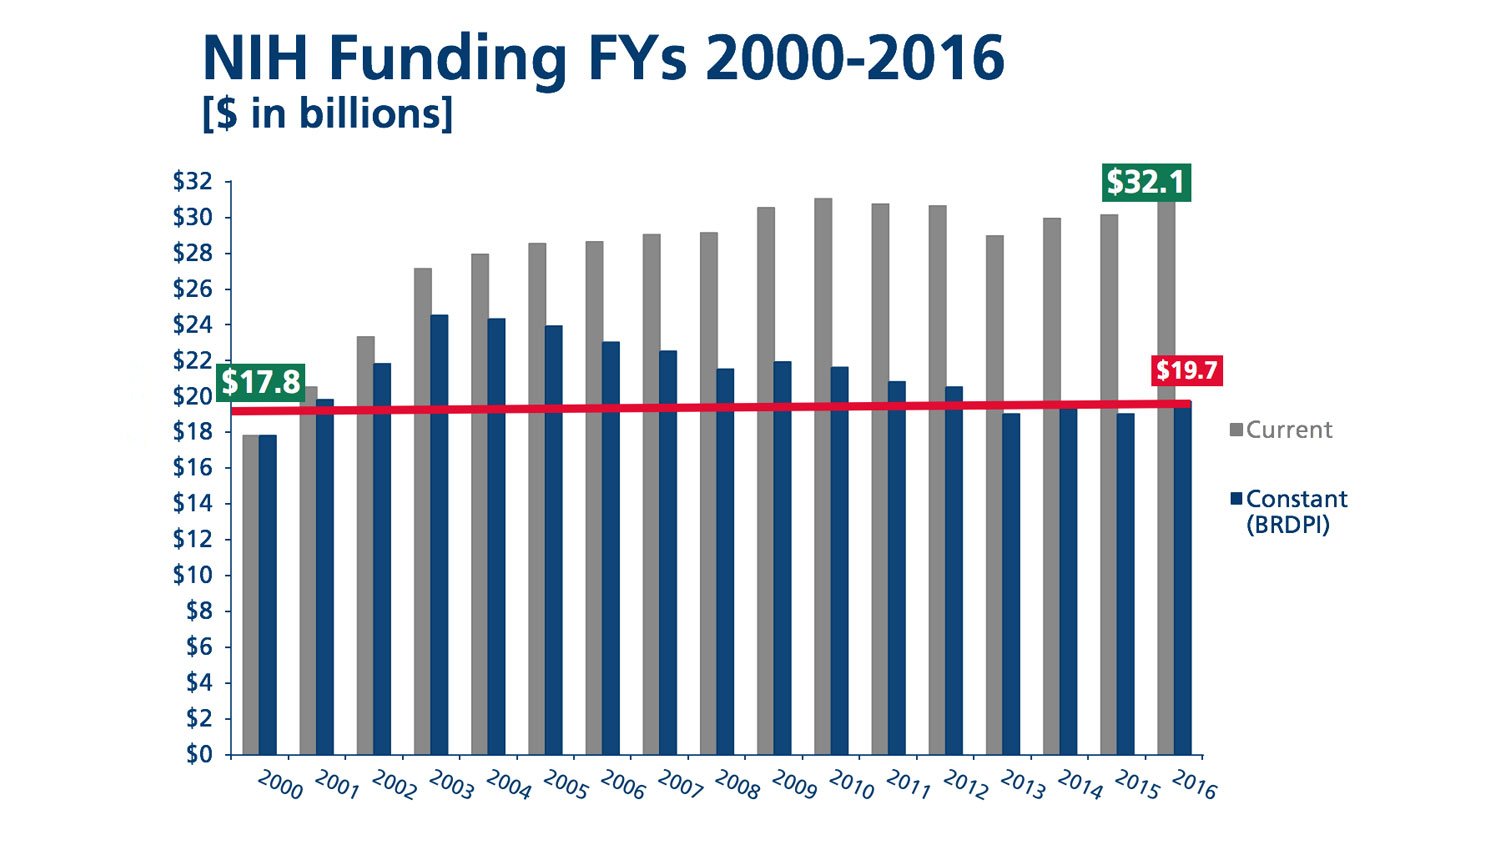 The 2014 level of funding is similar in purchasing power to levles from 2000 to 2001. The NIH budget, while increasing in dollar amount, is actually shrinking in power.